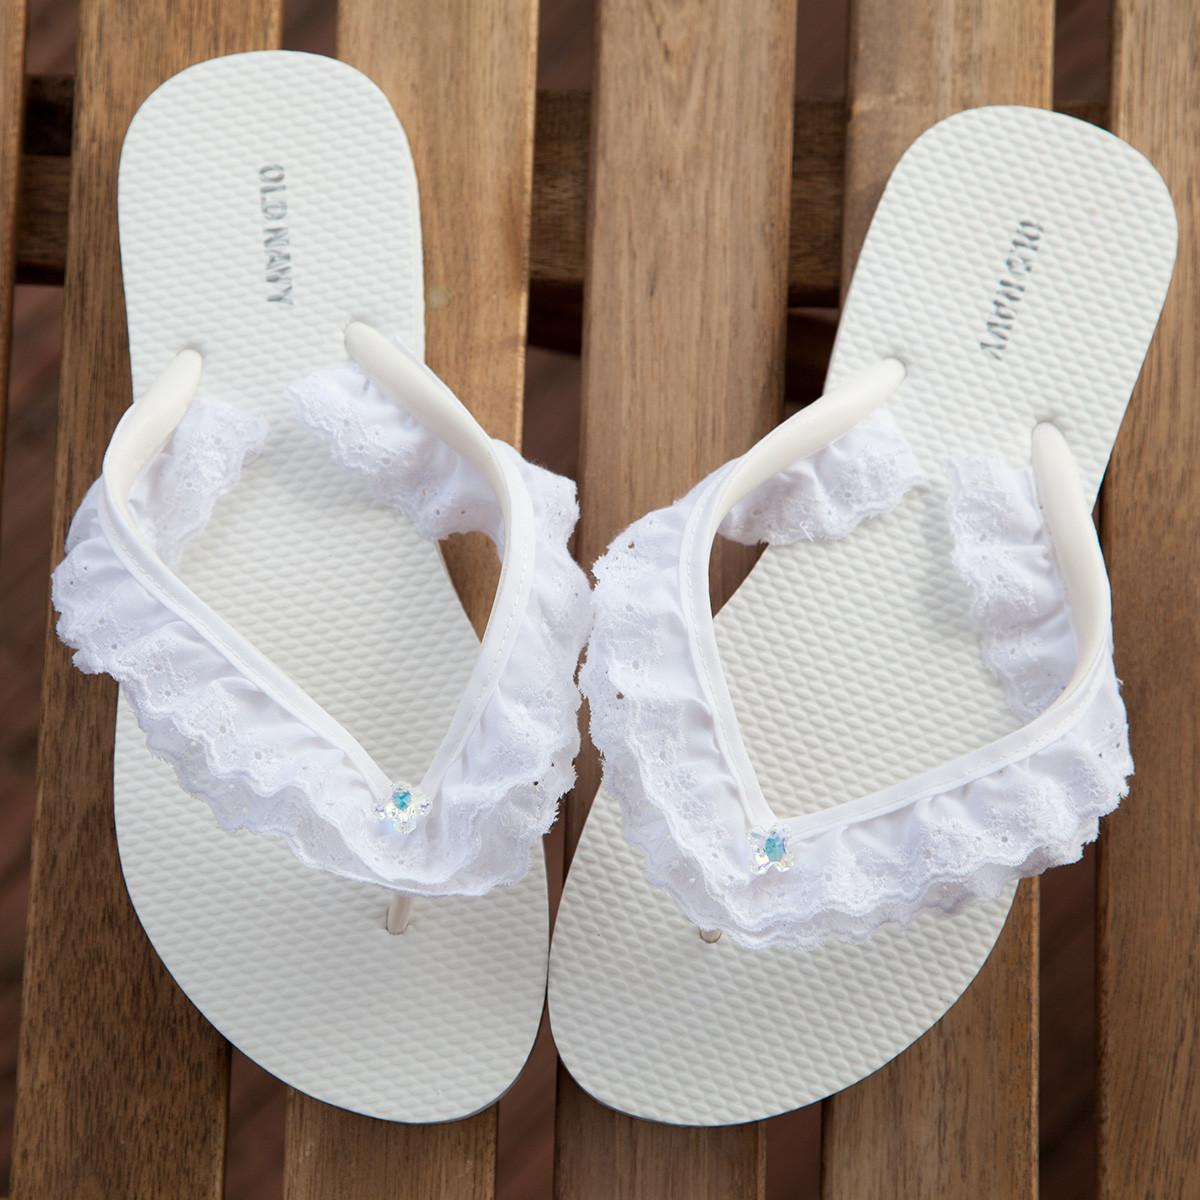 Eyelet lace flip flop DIY Picturesque Flip Flops Ideas That Are Great For Indoor Or Beach Day